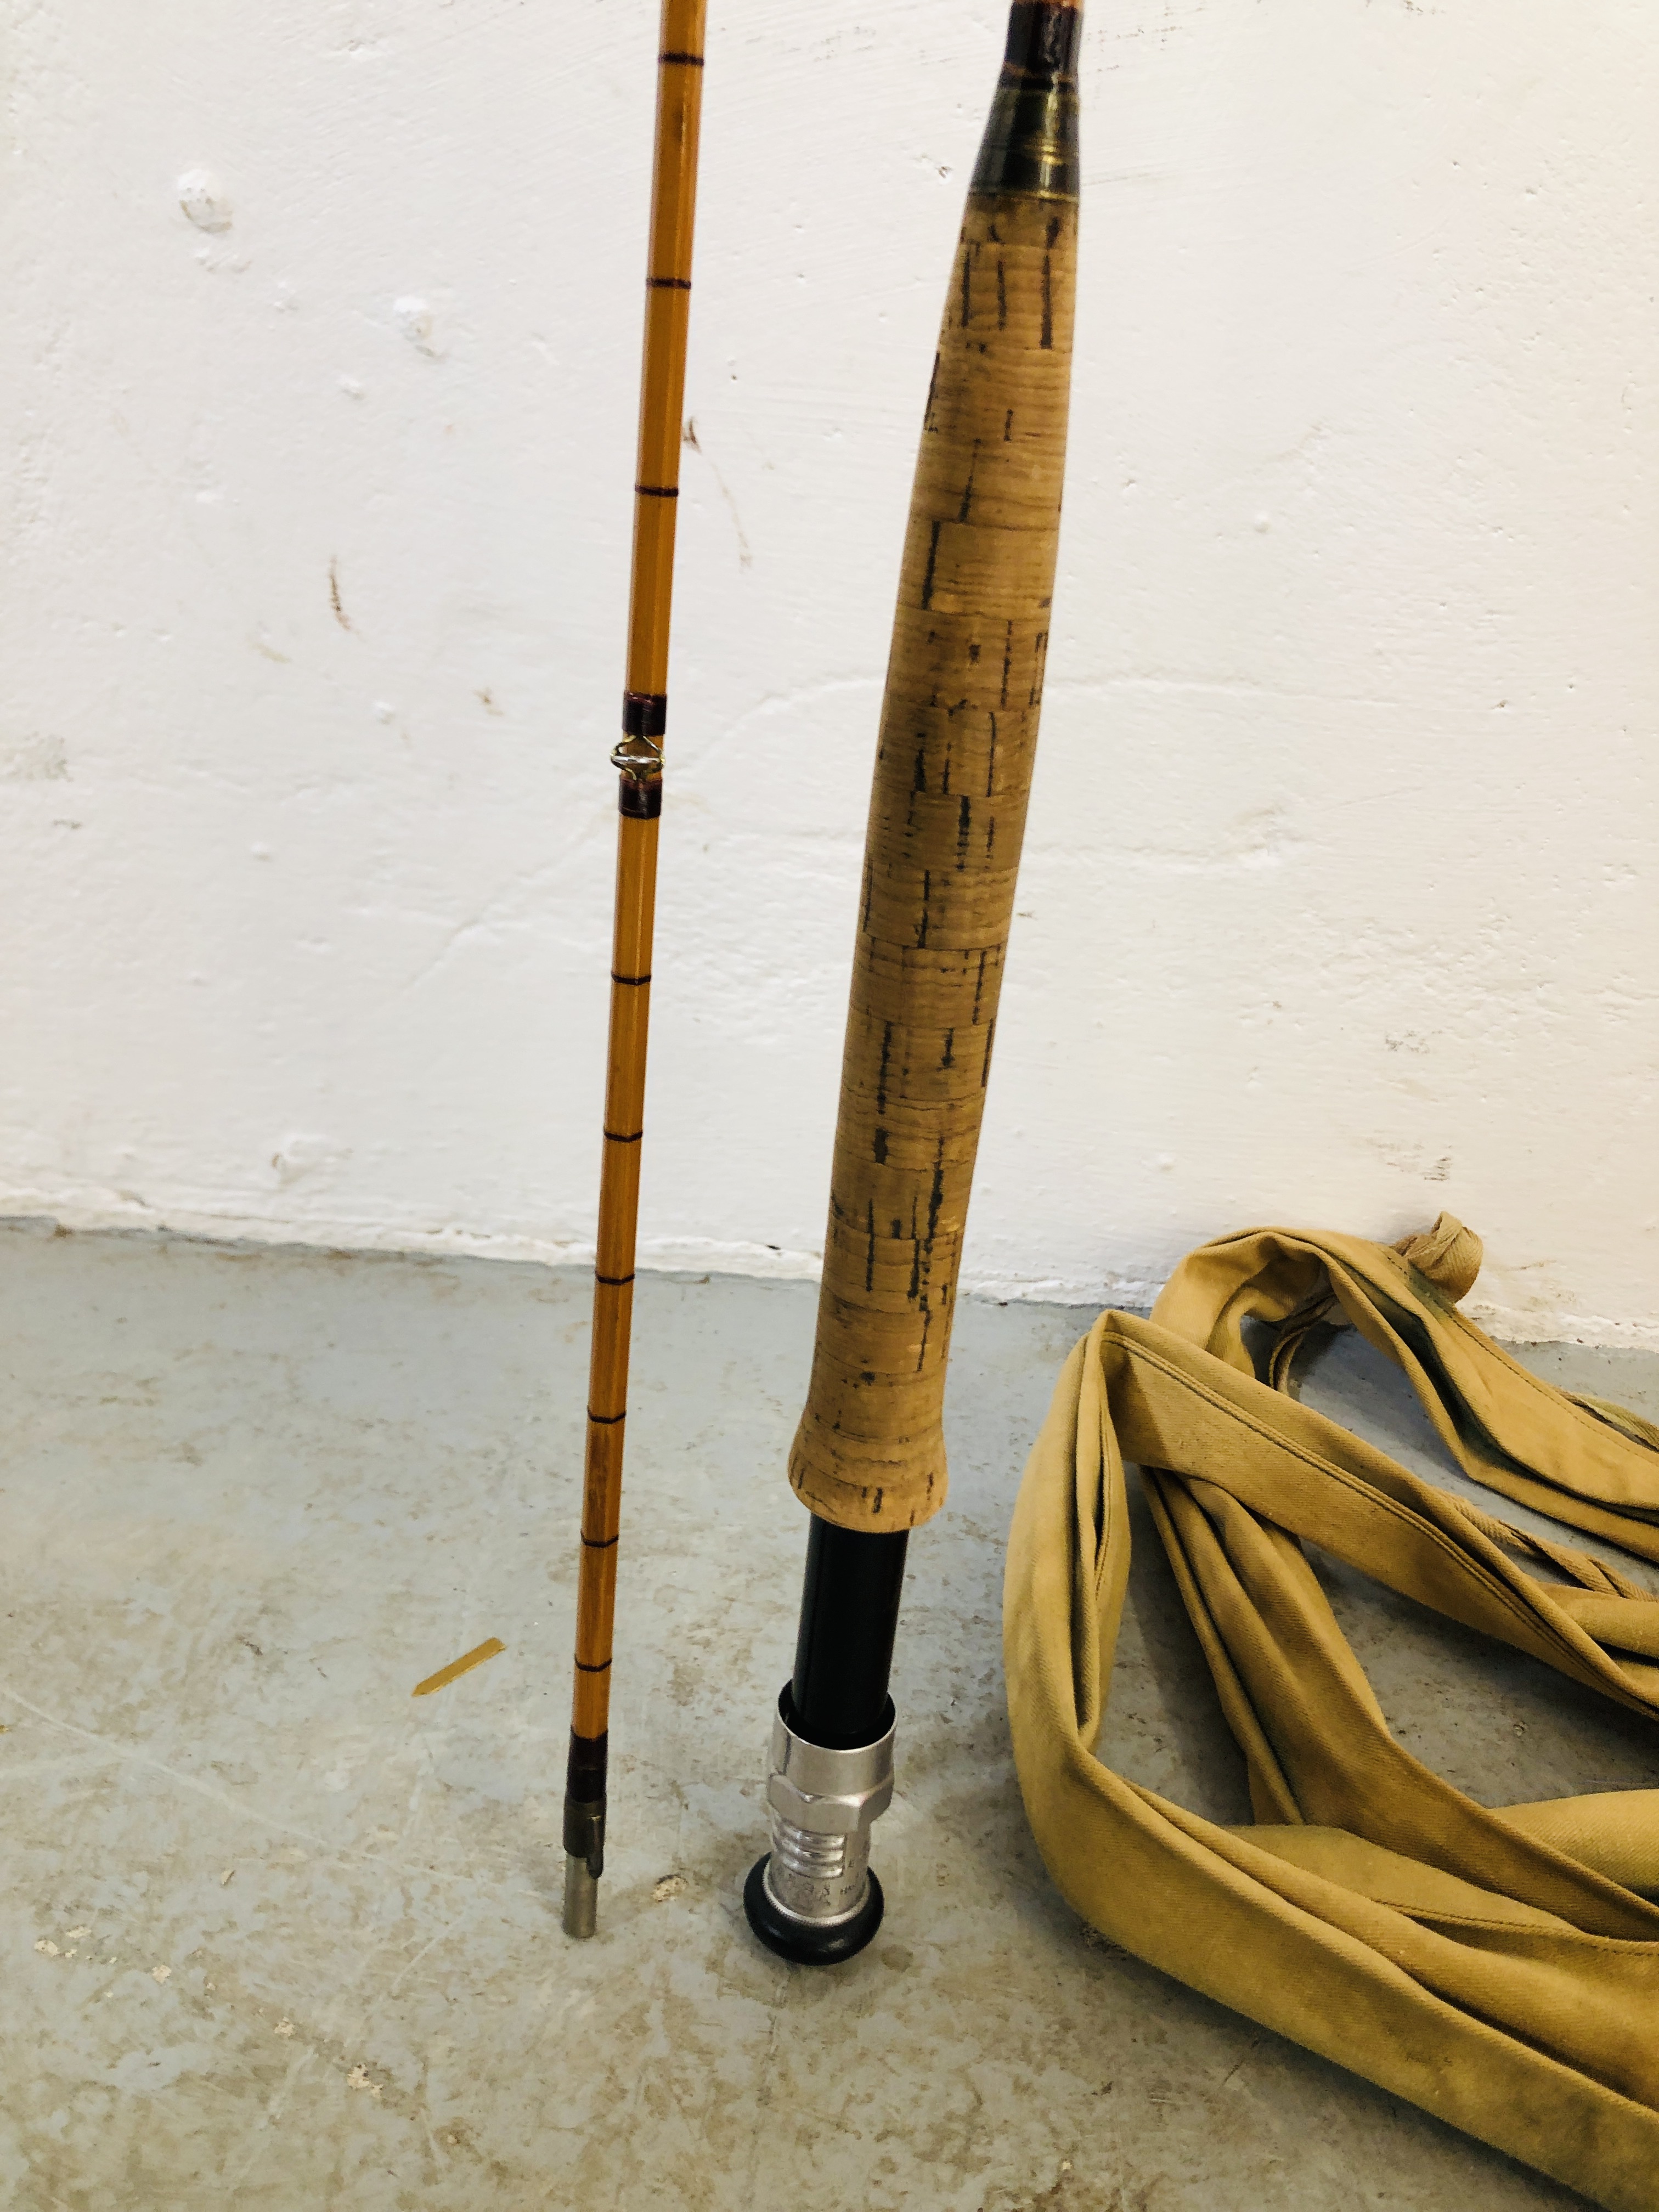 A HARDY "THE PERFECTION" TWO PIECE SPLIT CANE FISHING ROD IN BAG - Image 6 of 9